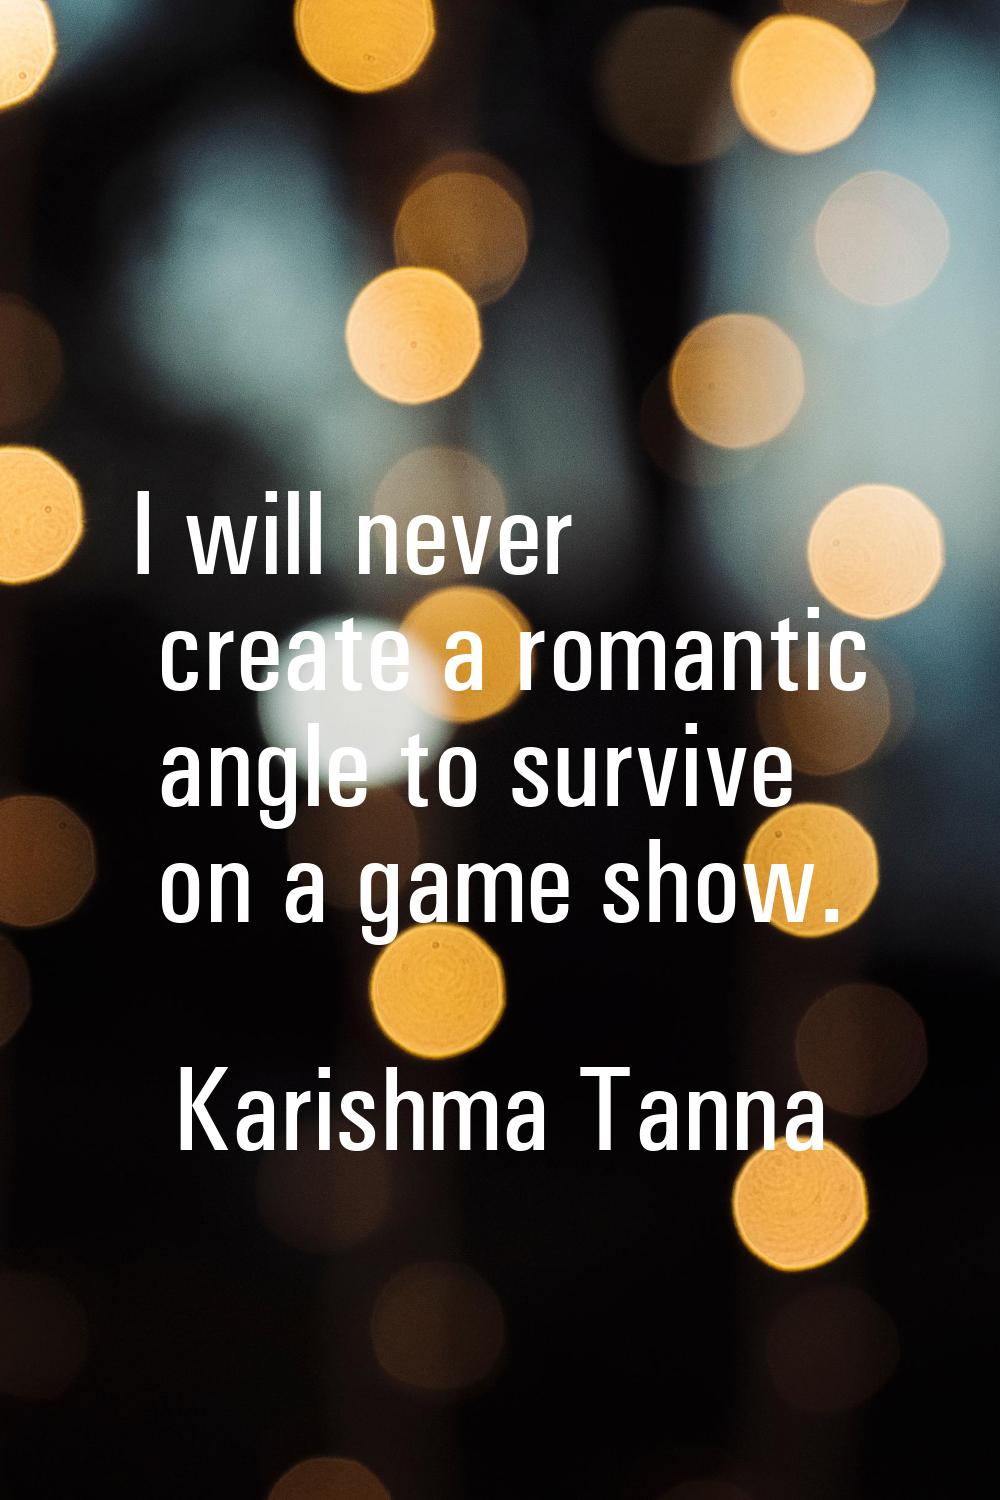 I will never create a romantic angle to survive on a game show.